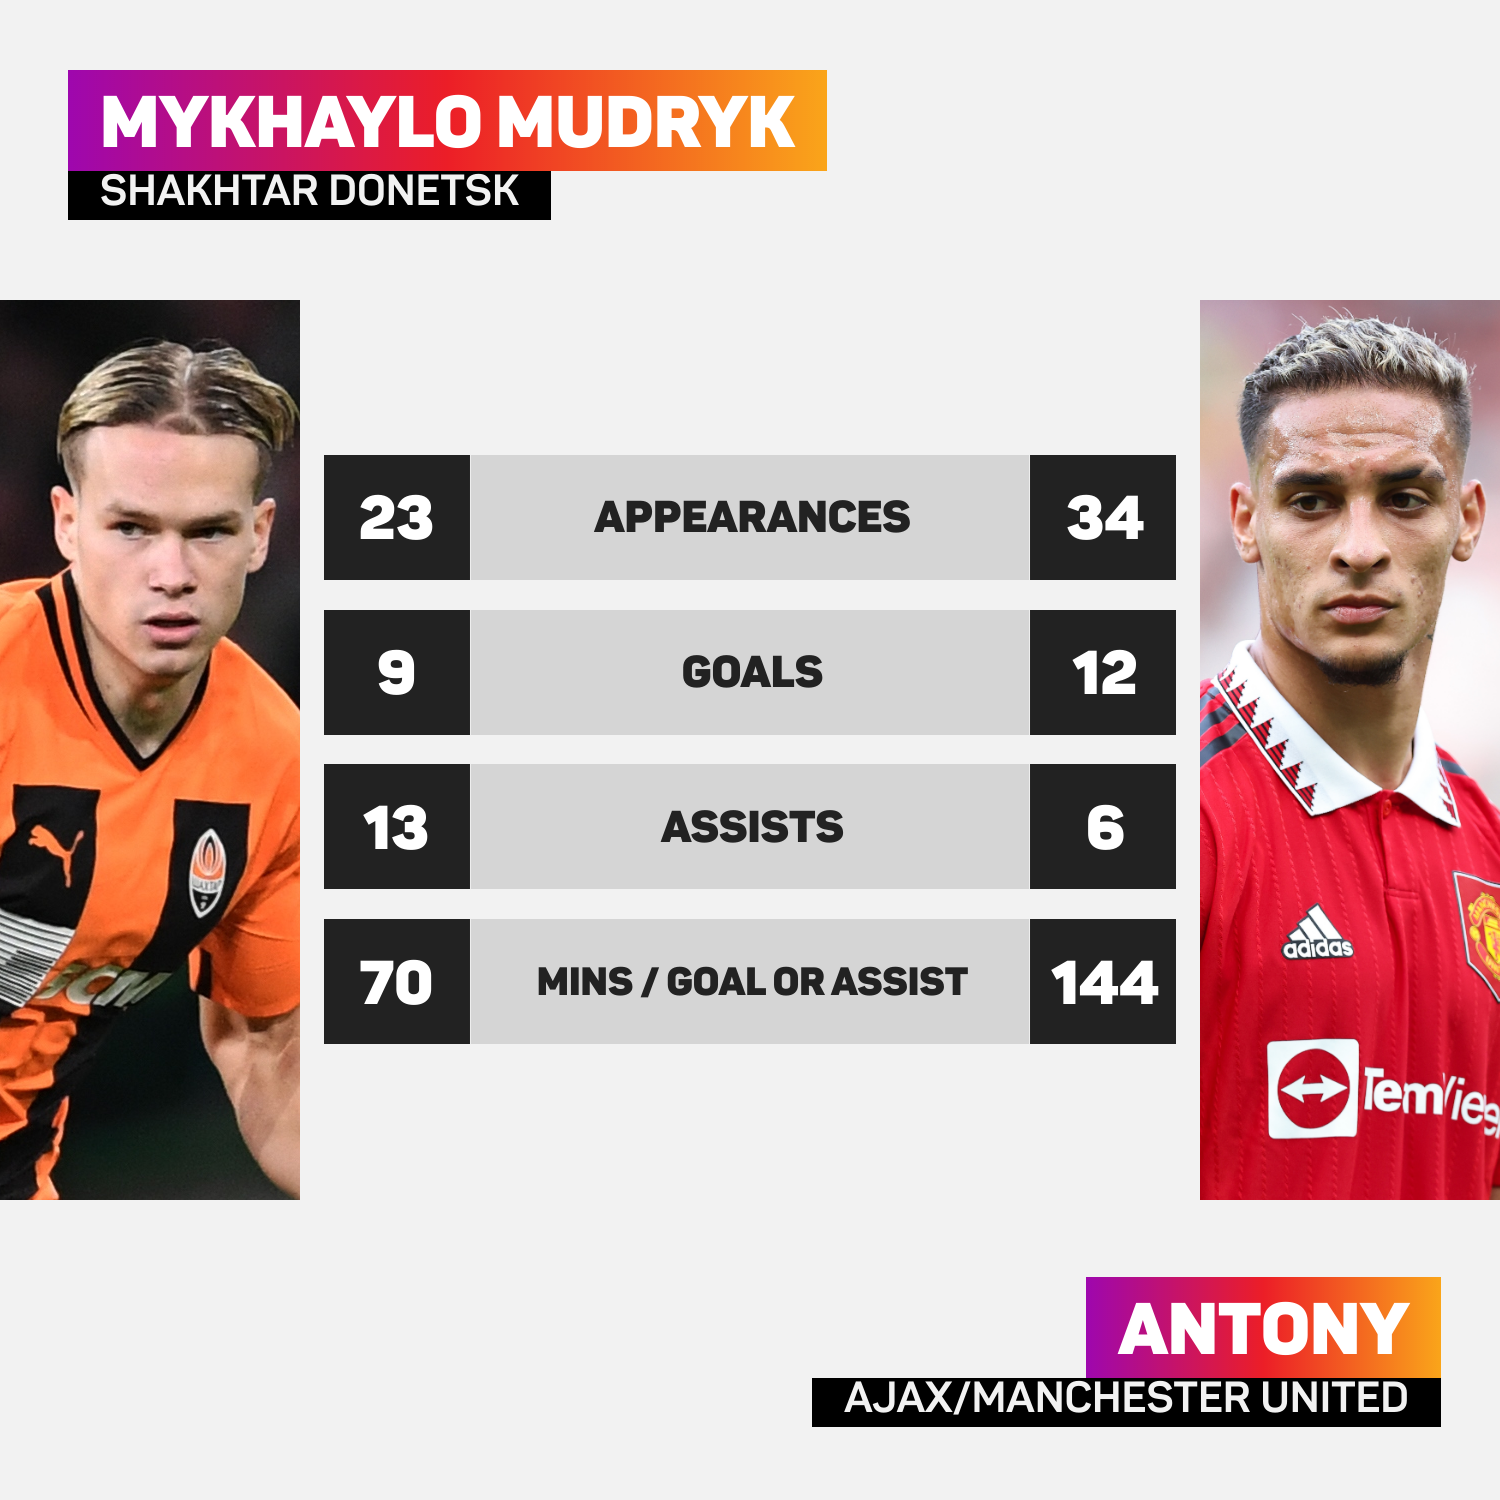 Mykhaylo Mudryk's league record compared to Antony's